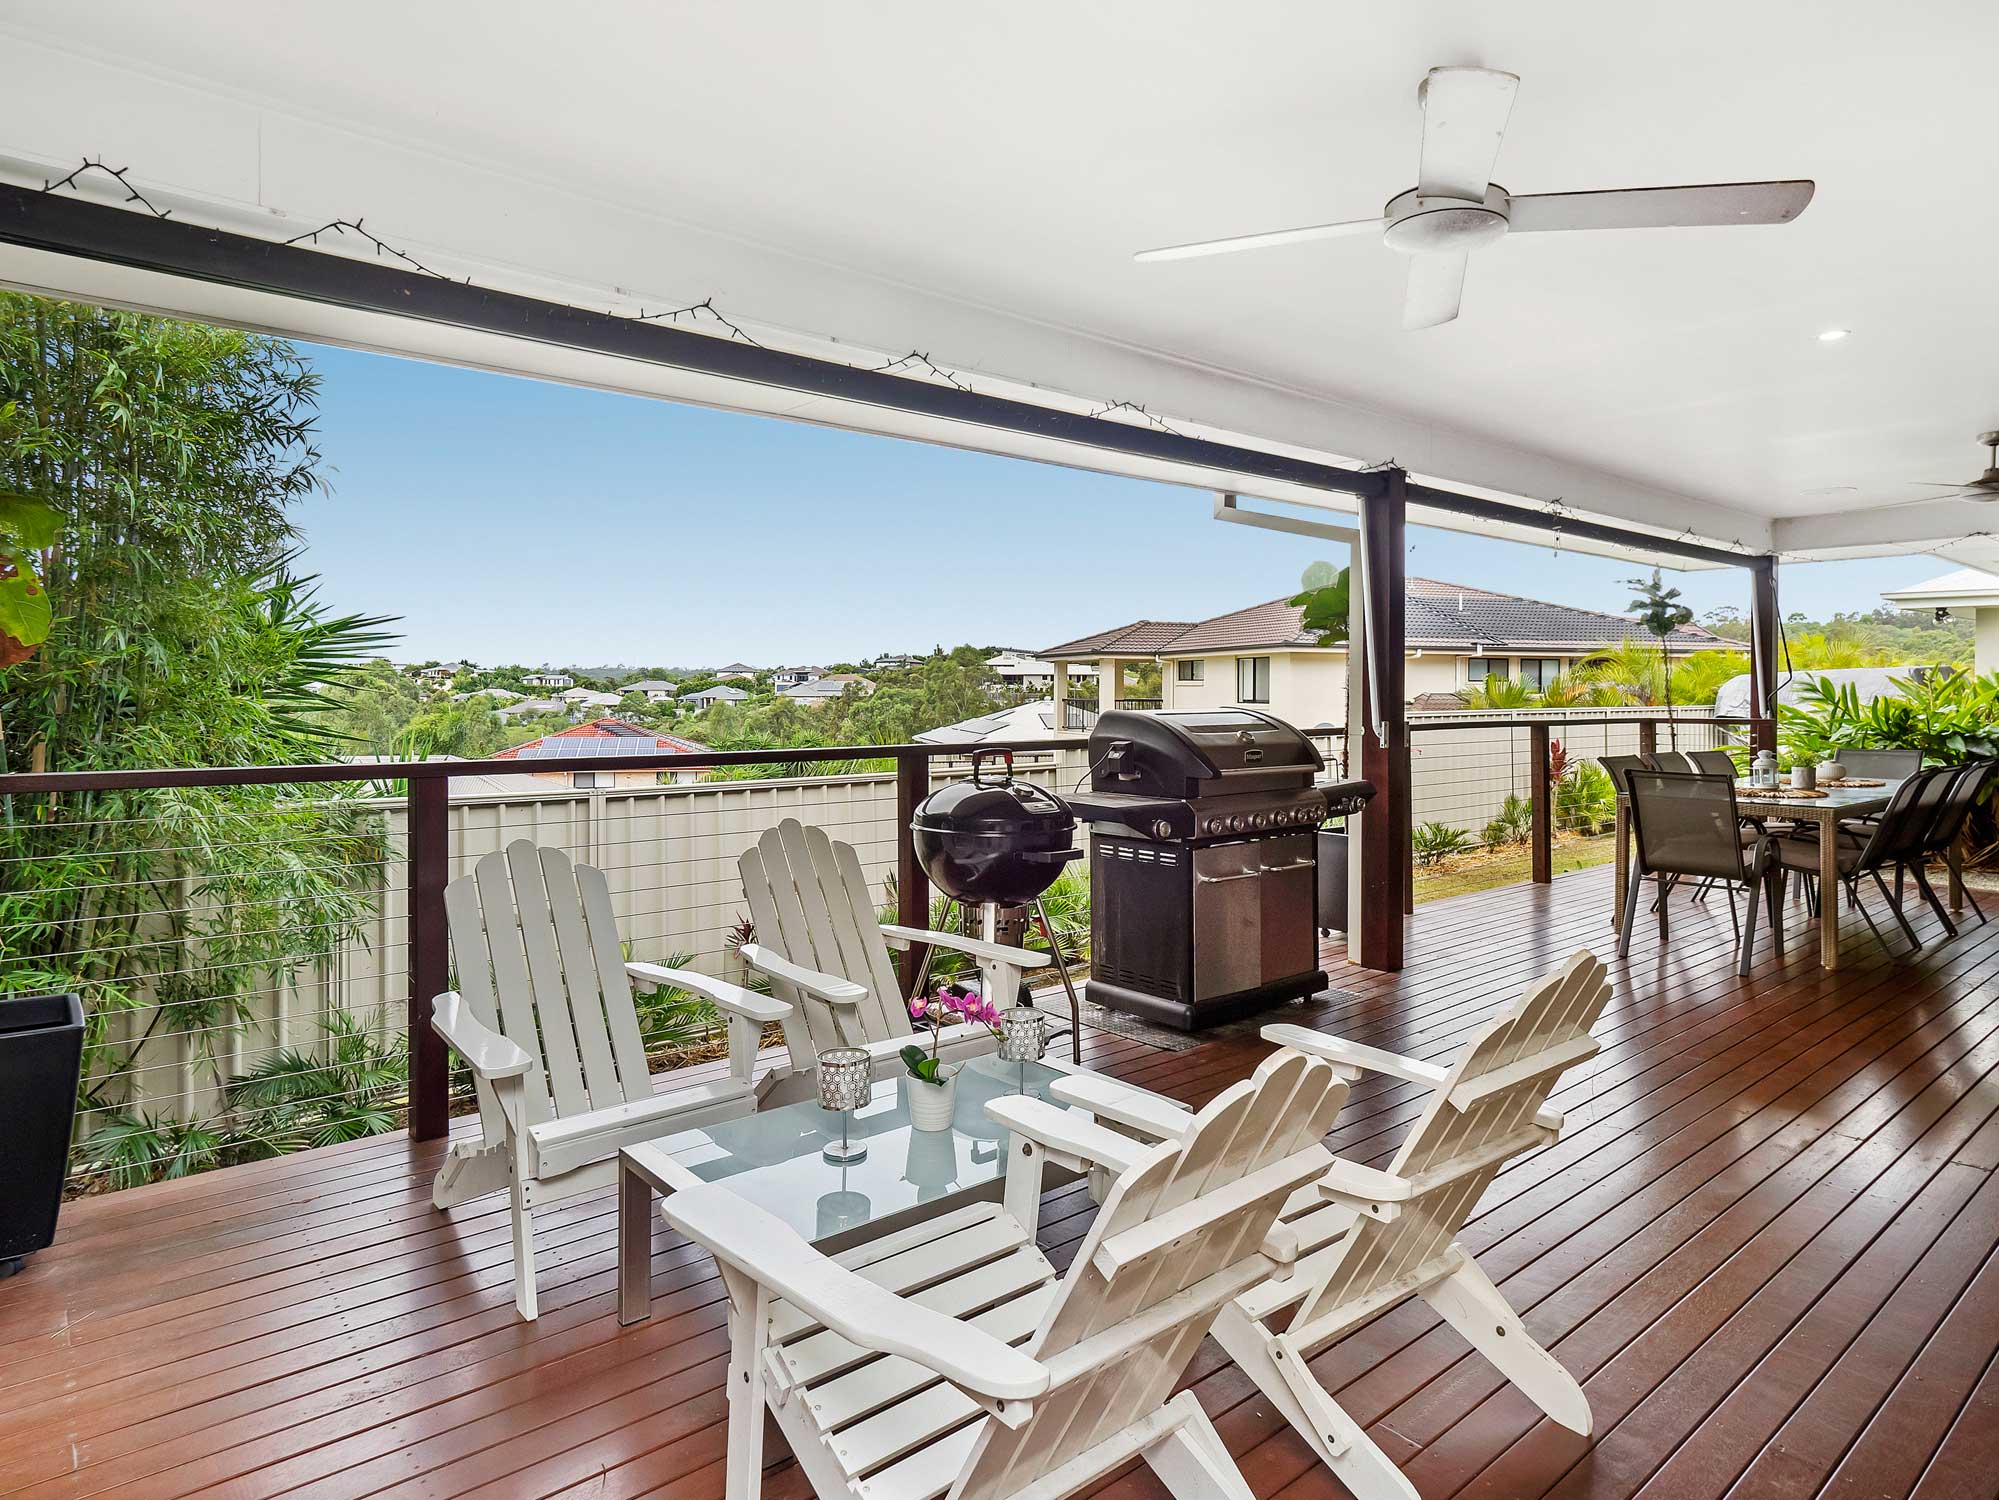 Outdoor entertaining areas - Real estate photography for a new home listing at Cashmere, Brisbane north side